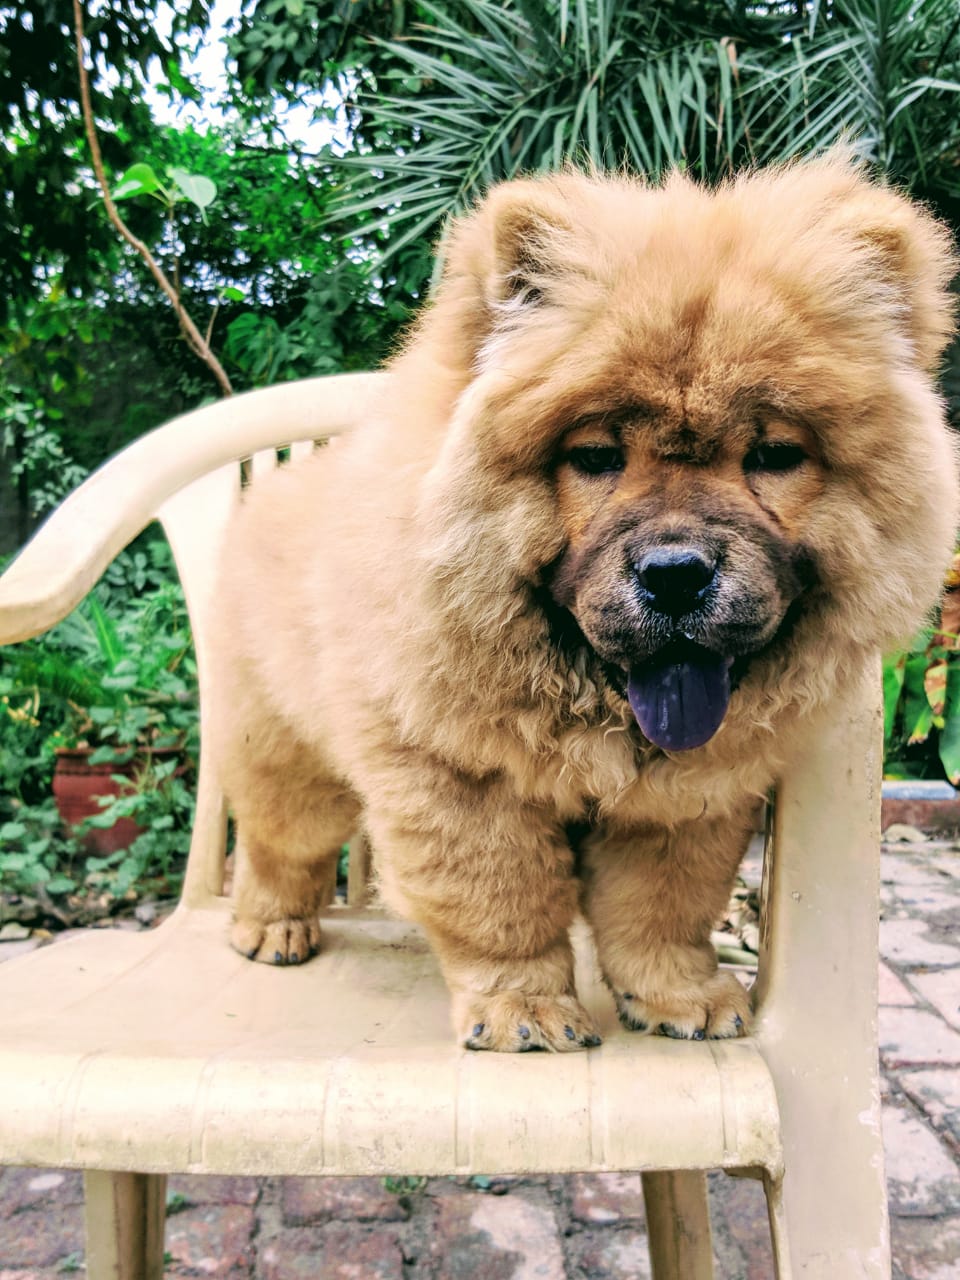 Is he pure breed chow chow